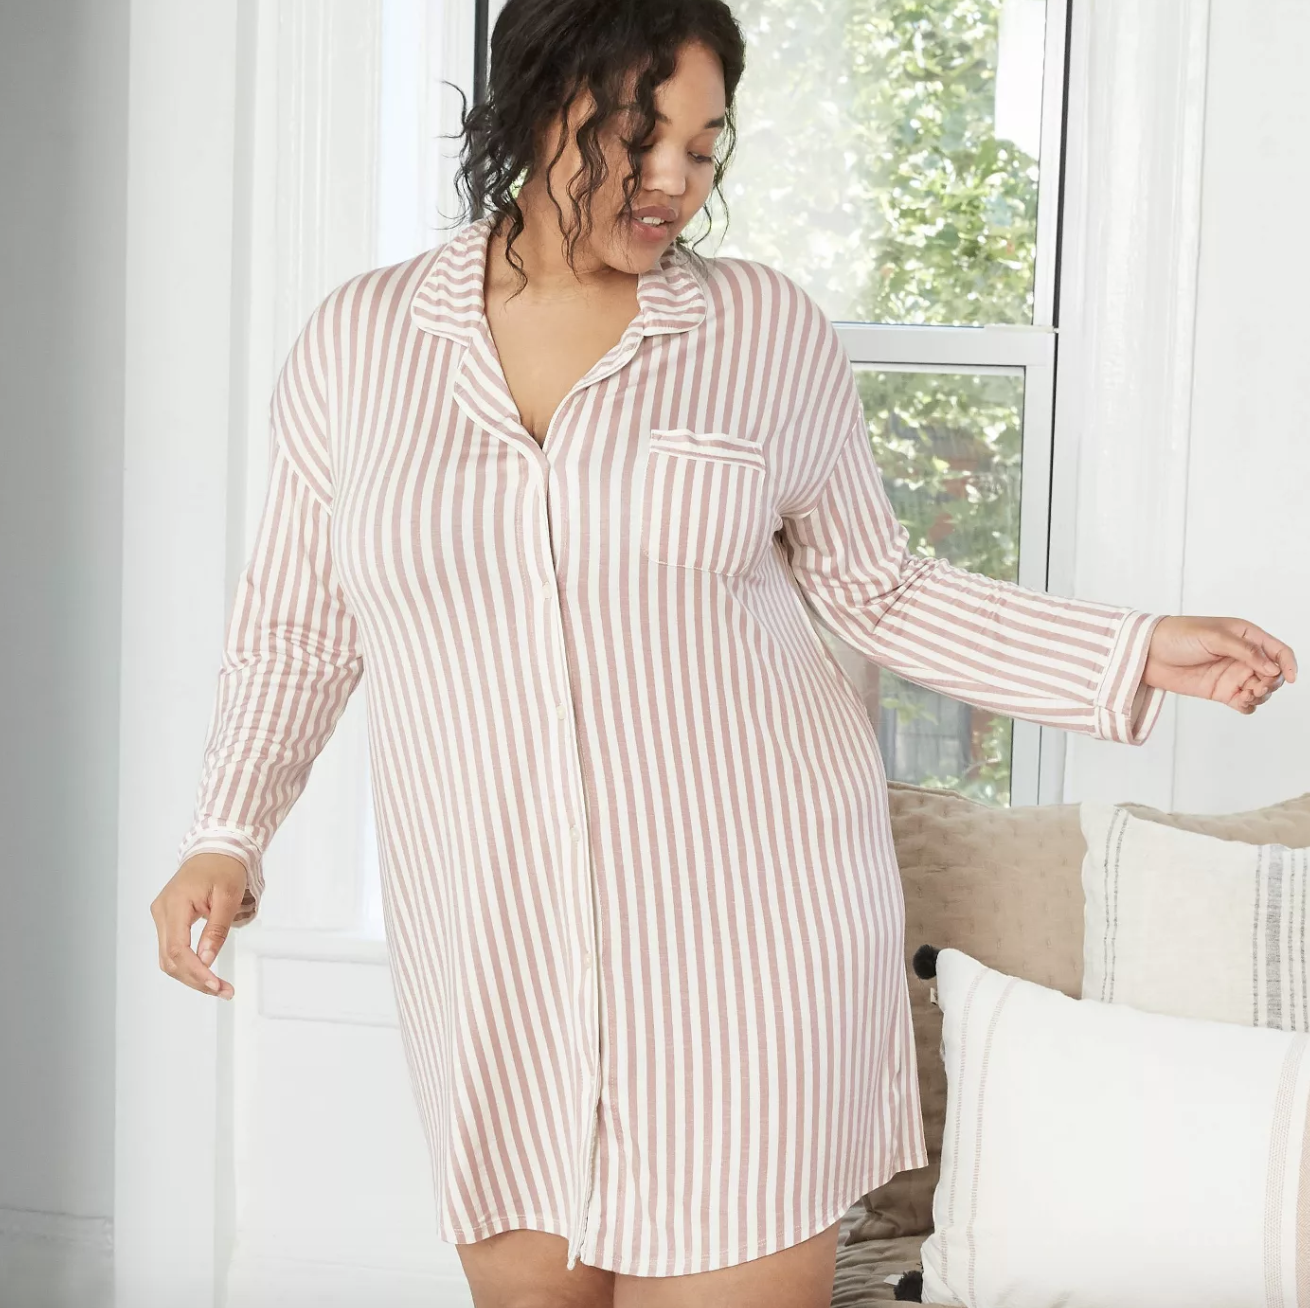 model wearing white and pink striped nightgown 